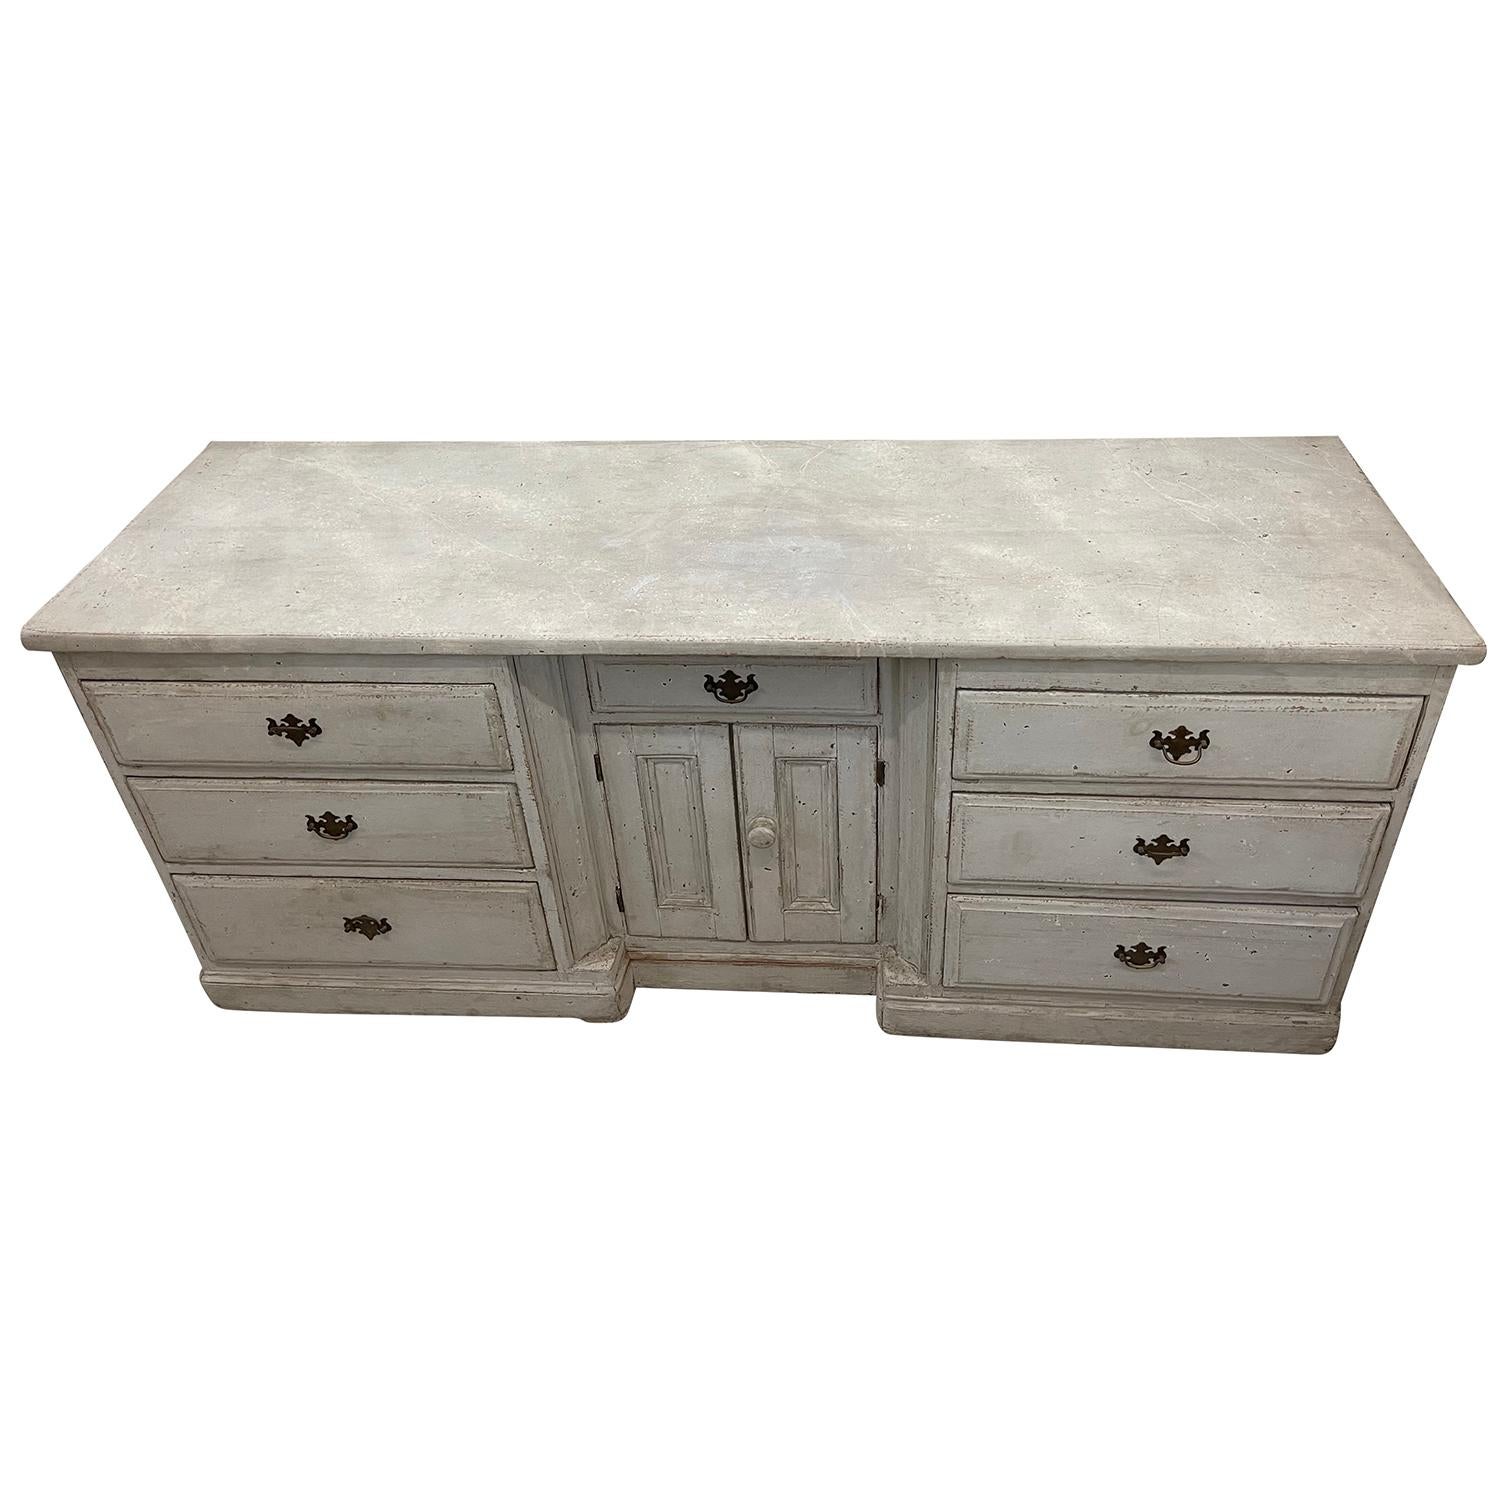 An antique Swedish Gustavian chest of drawers with two doors and six drawers, made of hand crafted painted Pinewood and chrome, in good condition. The Scandinavian sideboard is detailed in the Neoclassical Greek style with the original hardware and